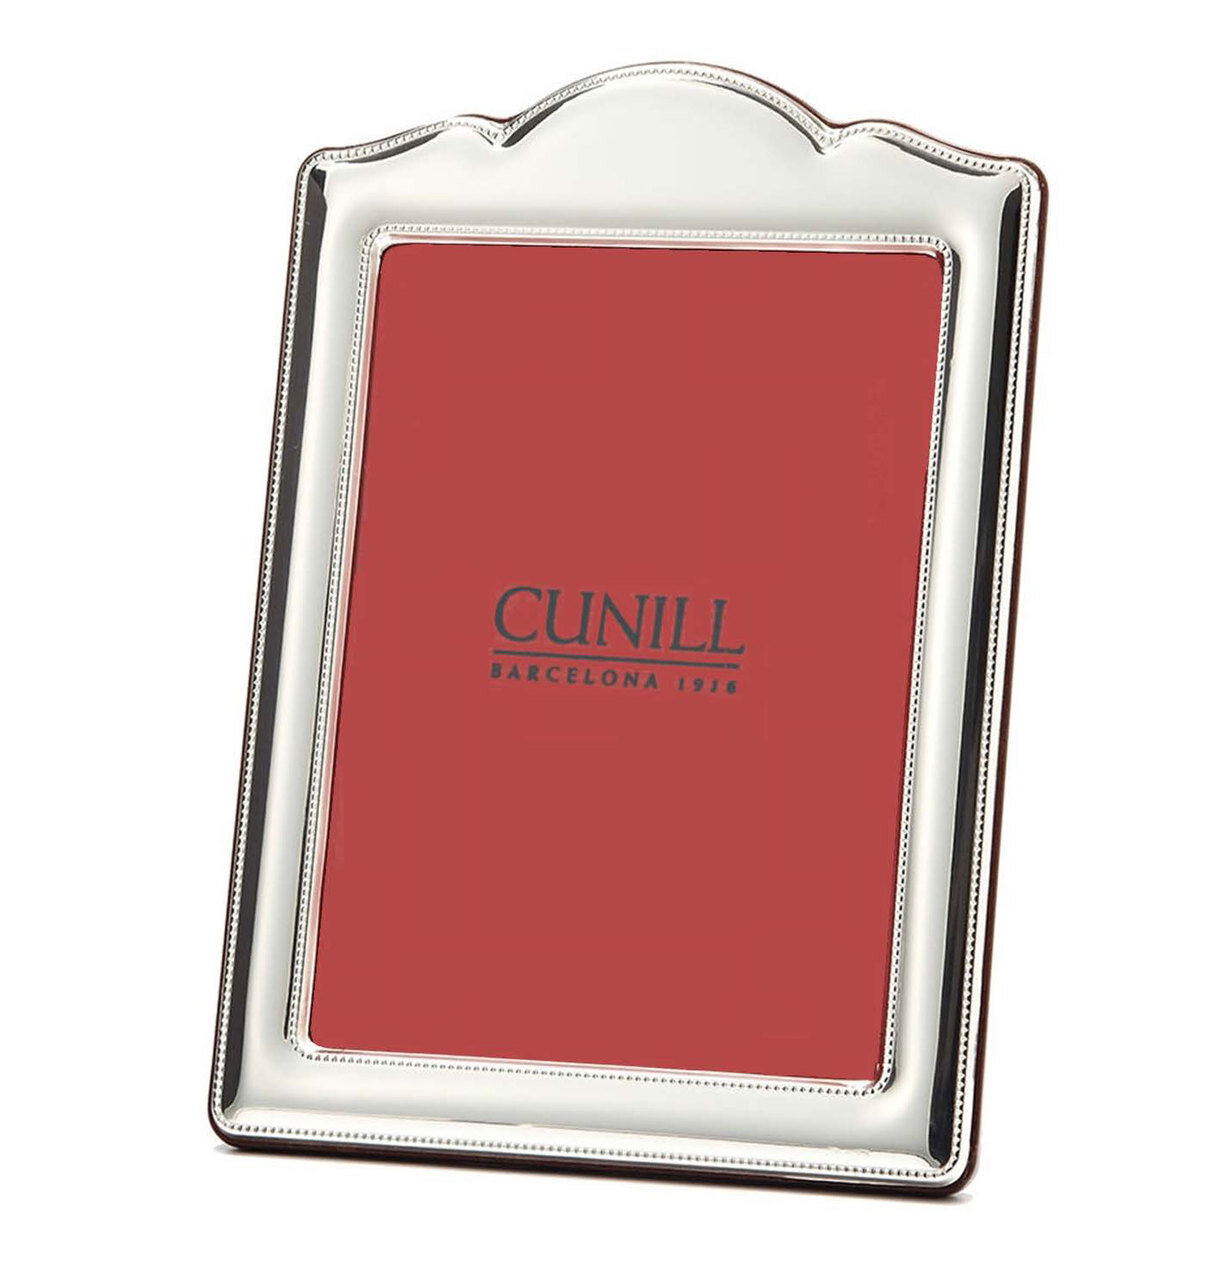 Cunill Anniversary 5 x 7 Inch Picture Frame - Sterling Silver